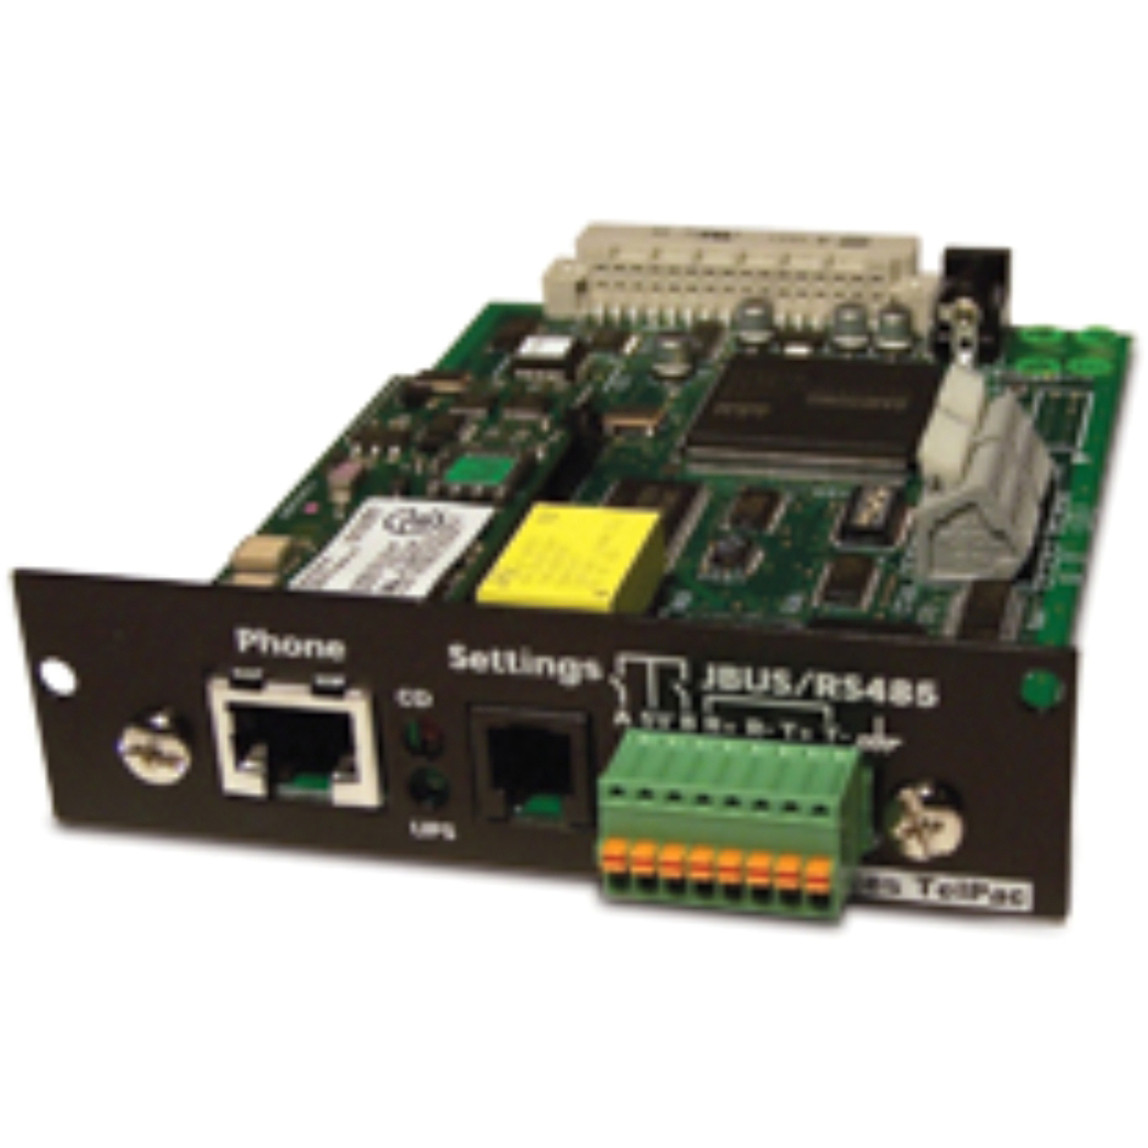 APC by Schneider Electric UPS Management AdapterGray 66096